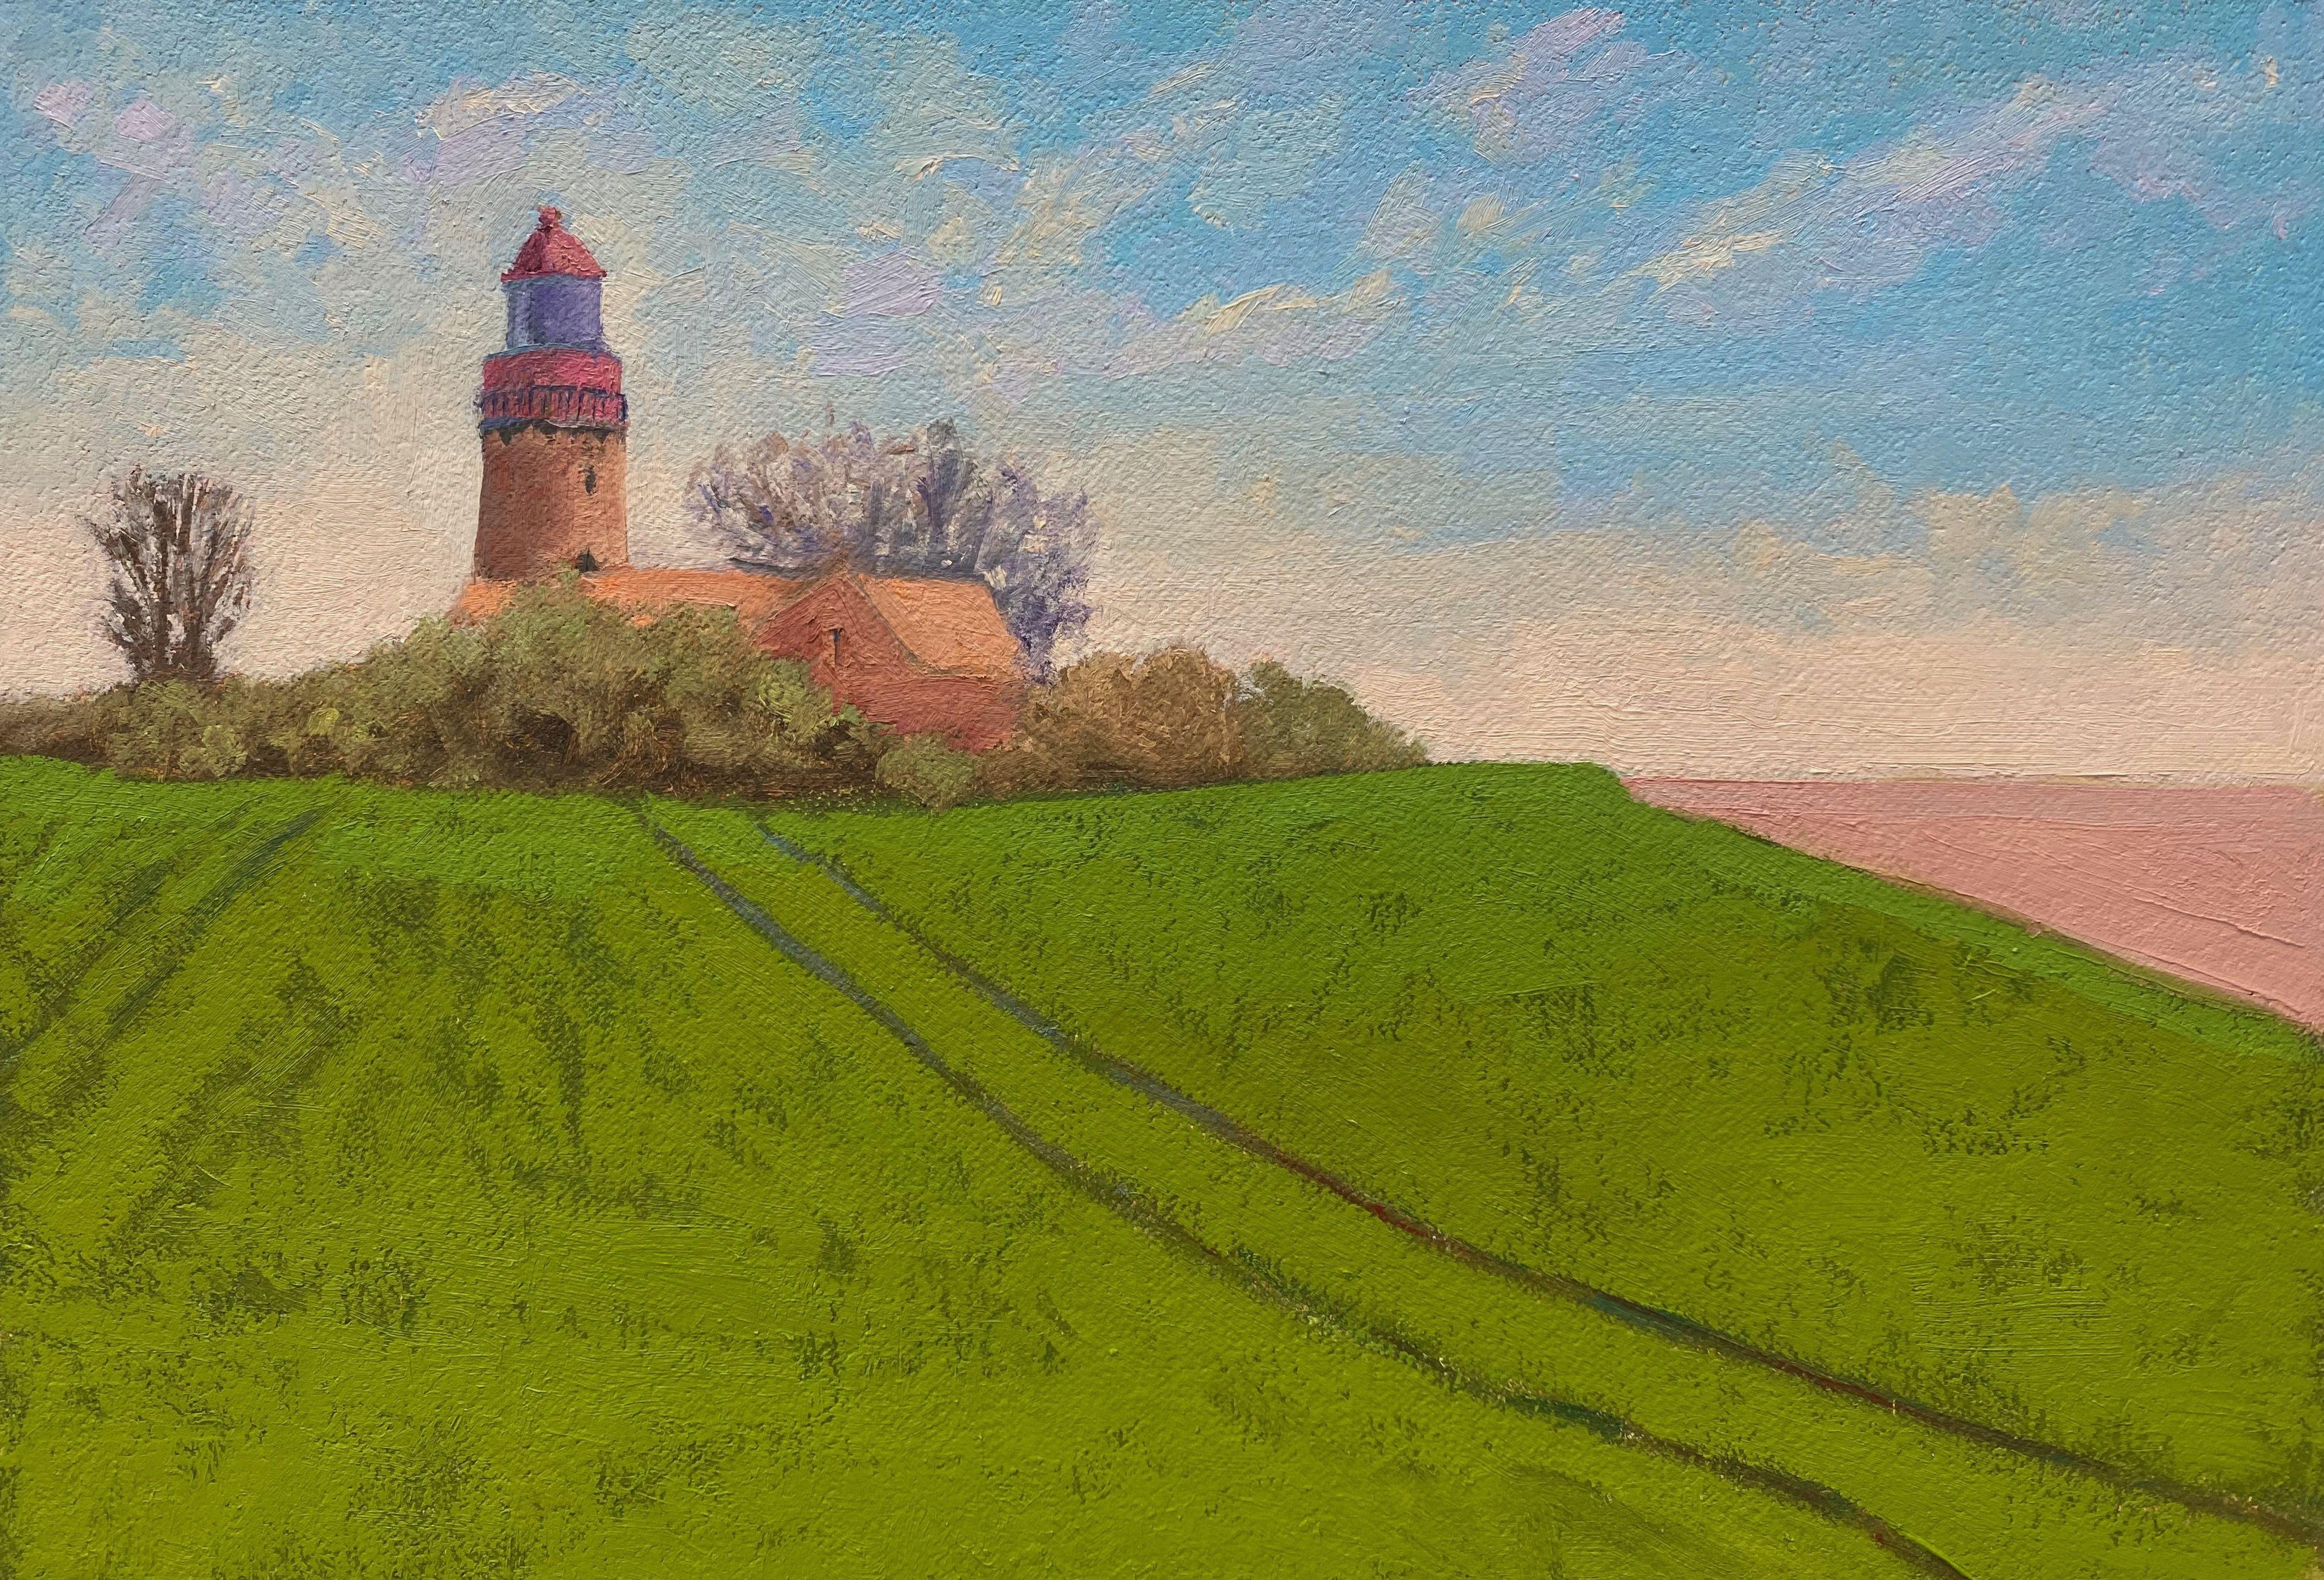 Plein air festival Baltic Sea Kuehlungsborn 2022.  This picture was painted at the Plein air festival in Kuehlungsborn on a path below the Bastorf lighthouse. It was very hot and hardly any shade. The locals use the path as a shortcut to the Baltic